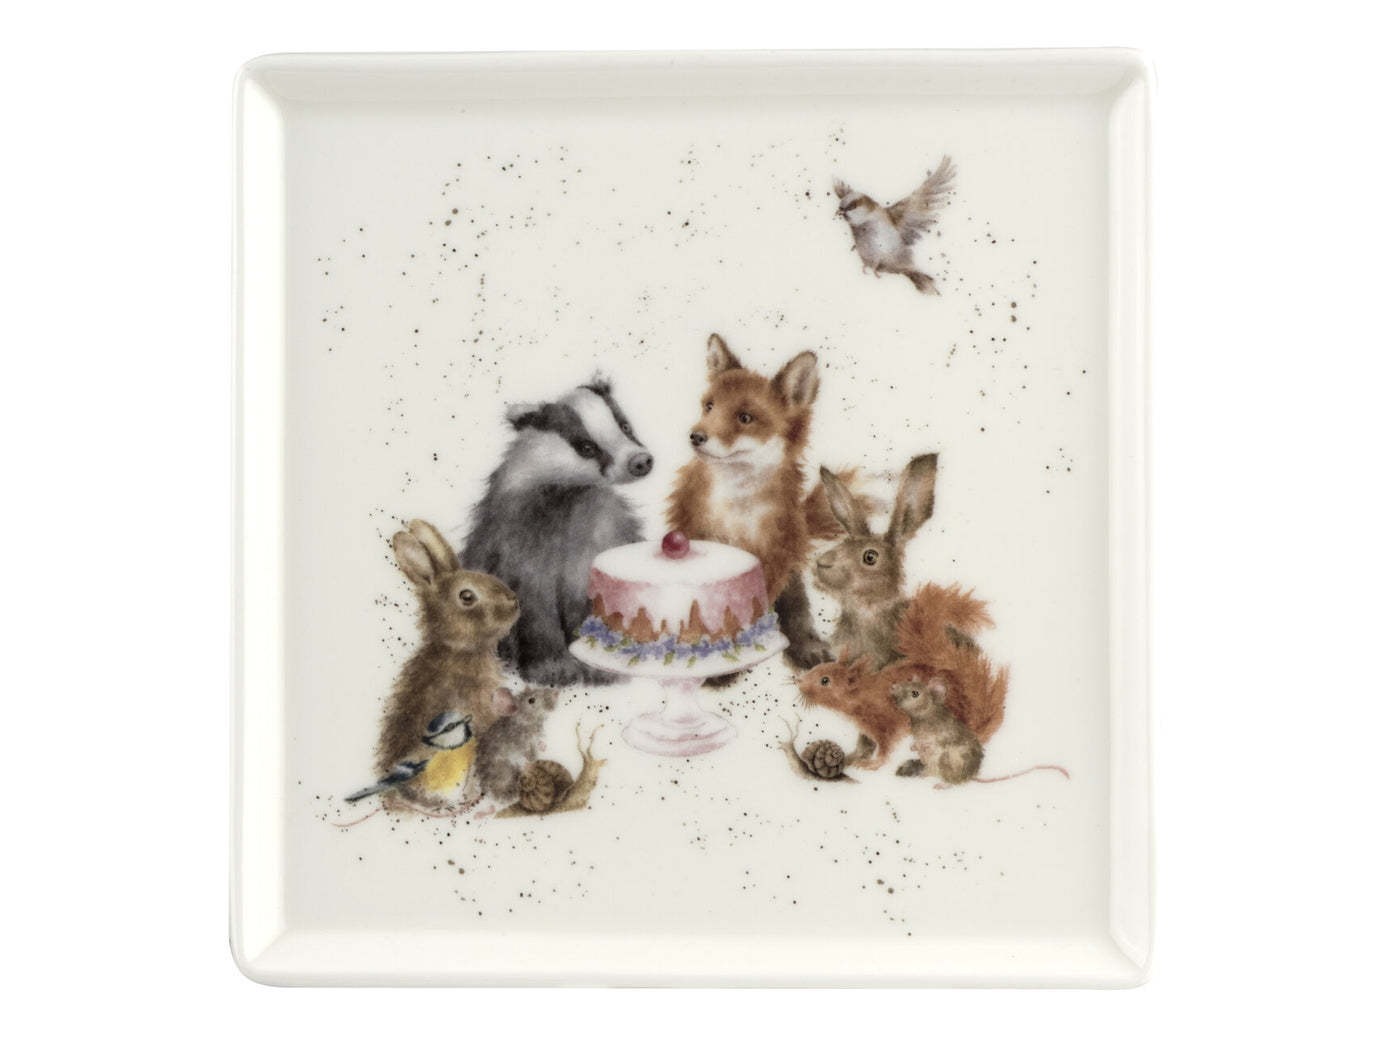 A white ceramic plate featuring a watercolour illustration of woodland animals gathered around a cake stand. The animals include a badger, fox, blue tit, sparrow, squirrels, snails, and rats. The cake stand holds a pink frosted cake. The plate's background showcases Wrendale's distinctive eggshell speckles.